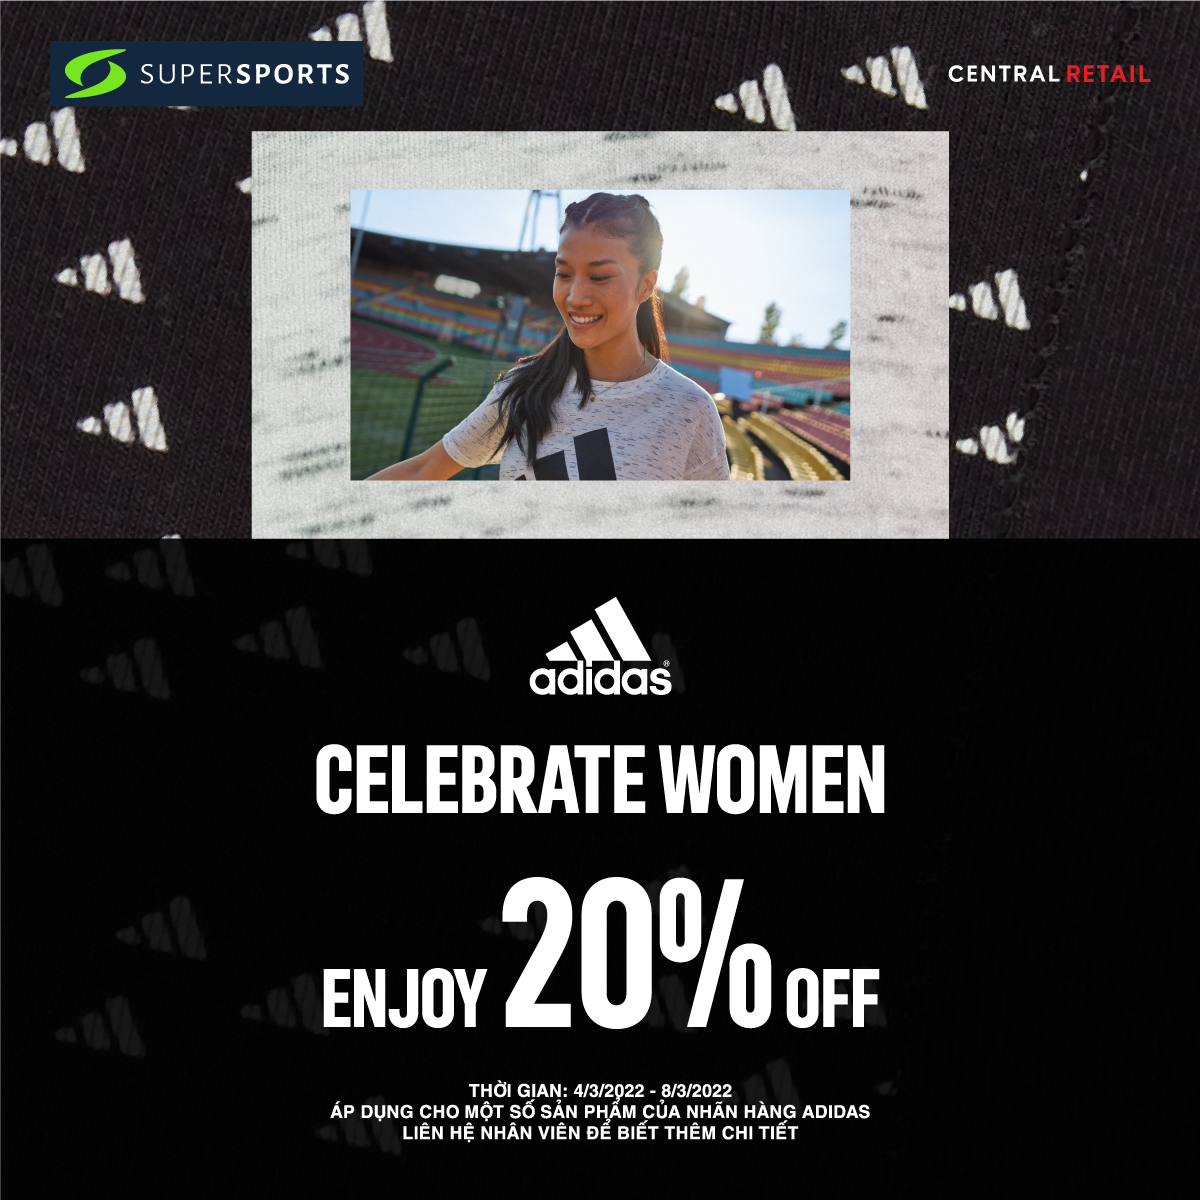 HAPPY INTERNATIONAL WOMEN'S DAY🏃‍♀️‍ADIDAS 20% OFF MANY HOT PRODUCTS